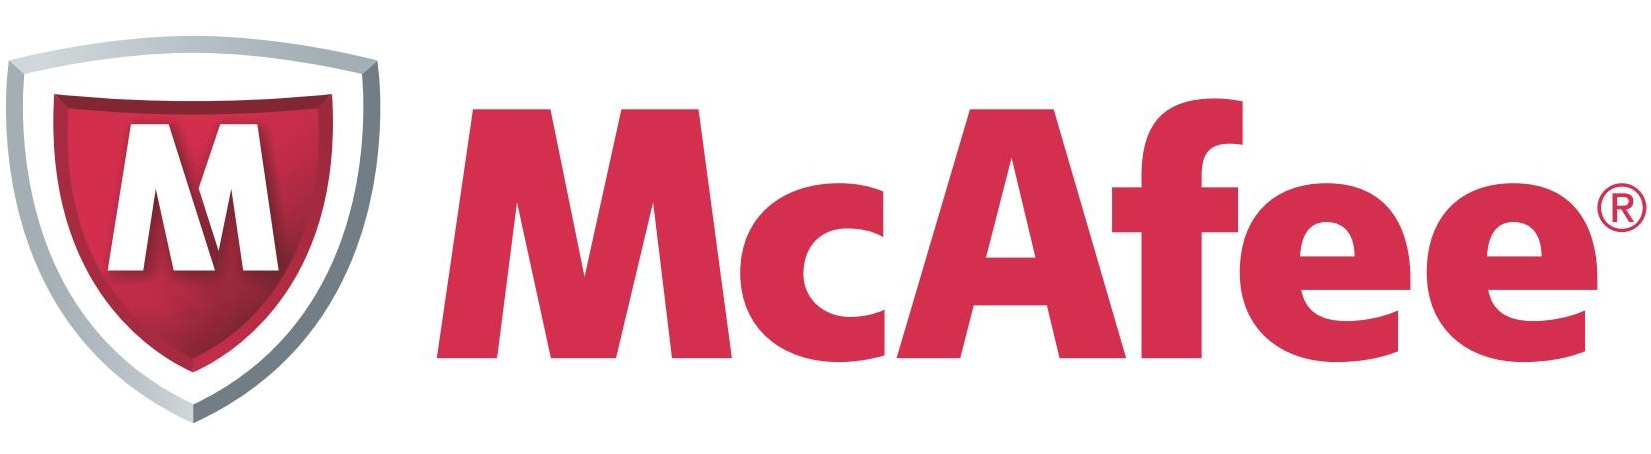 McAfee Endpoint Threat Defense + 1 Year Gold Software Support - License - 1 Node